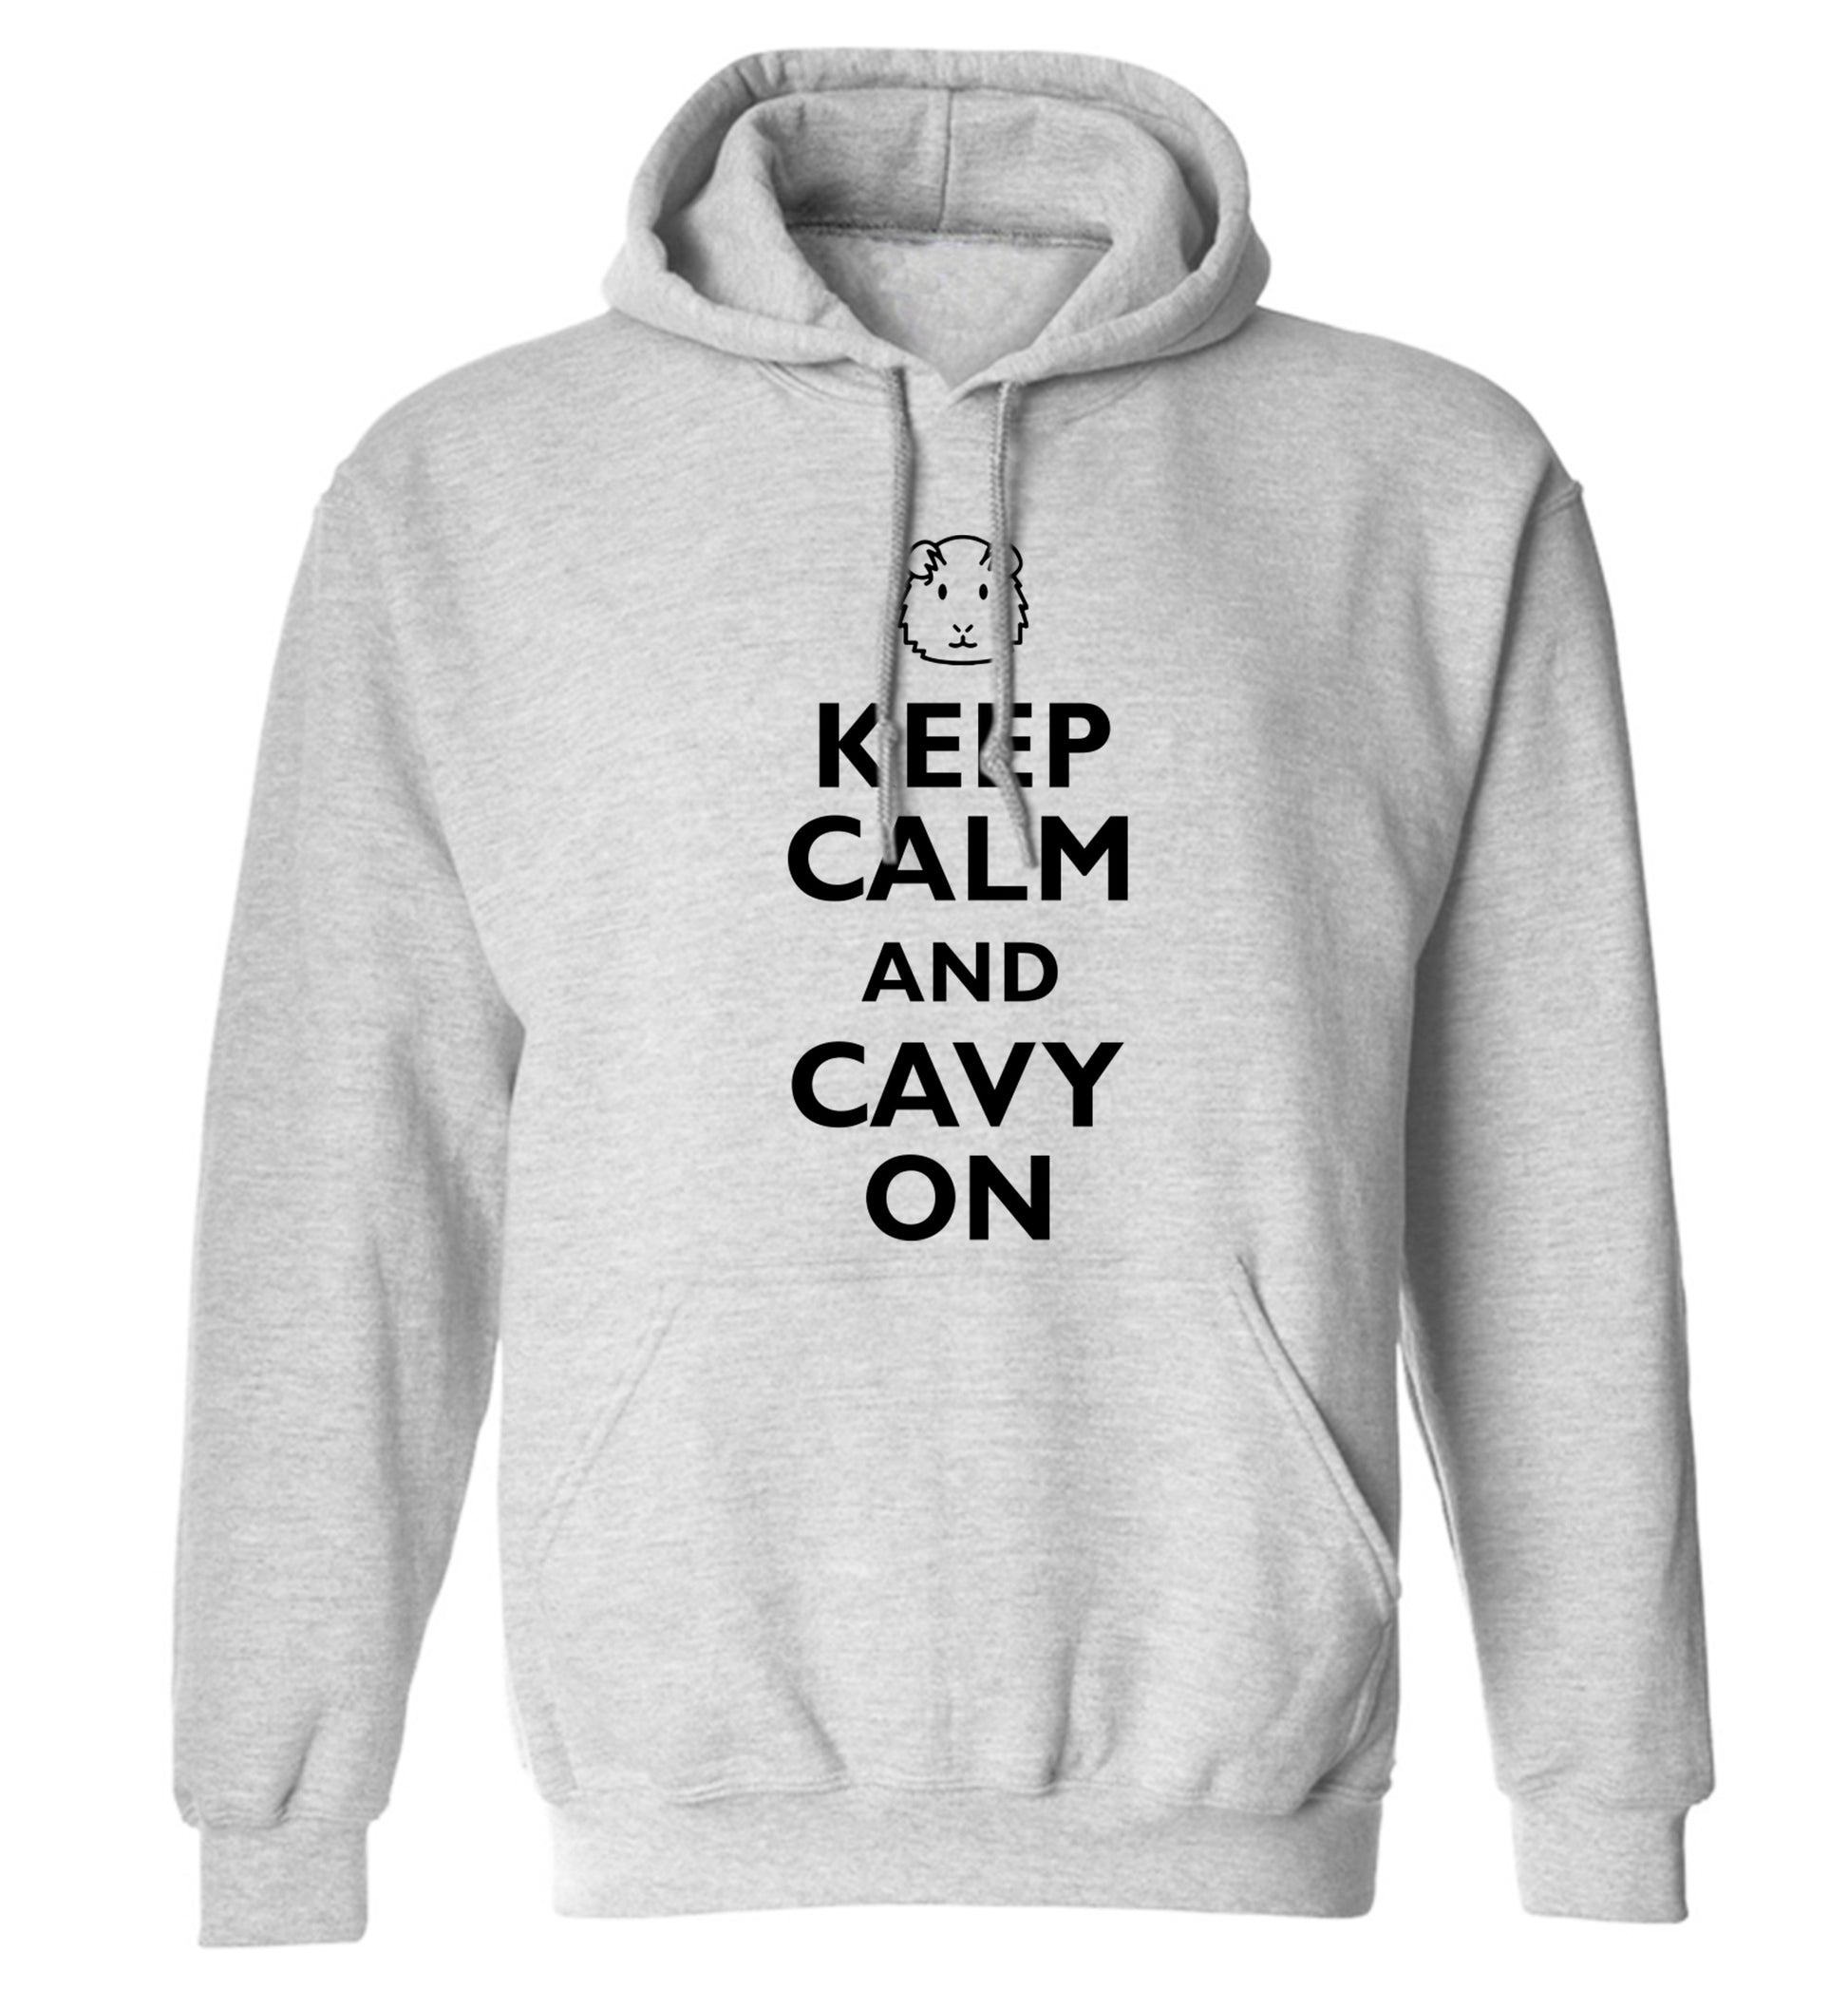 Keep calm and cavvy on adults unisex grey hoodie 2XL